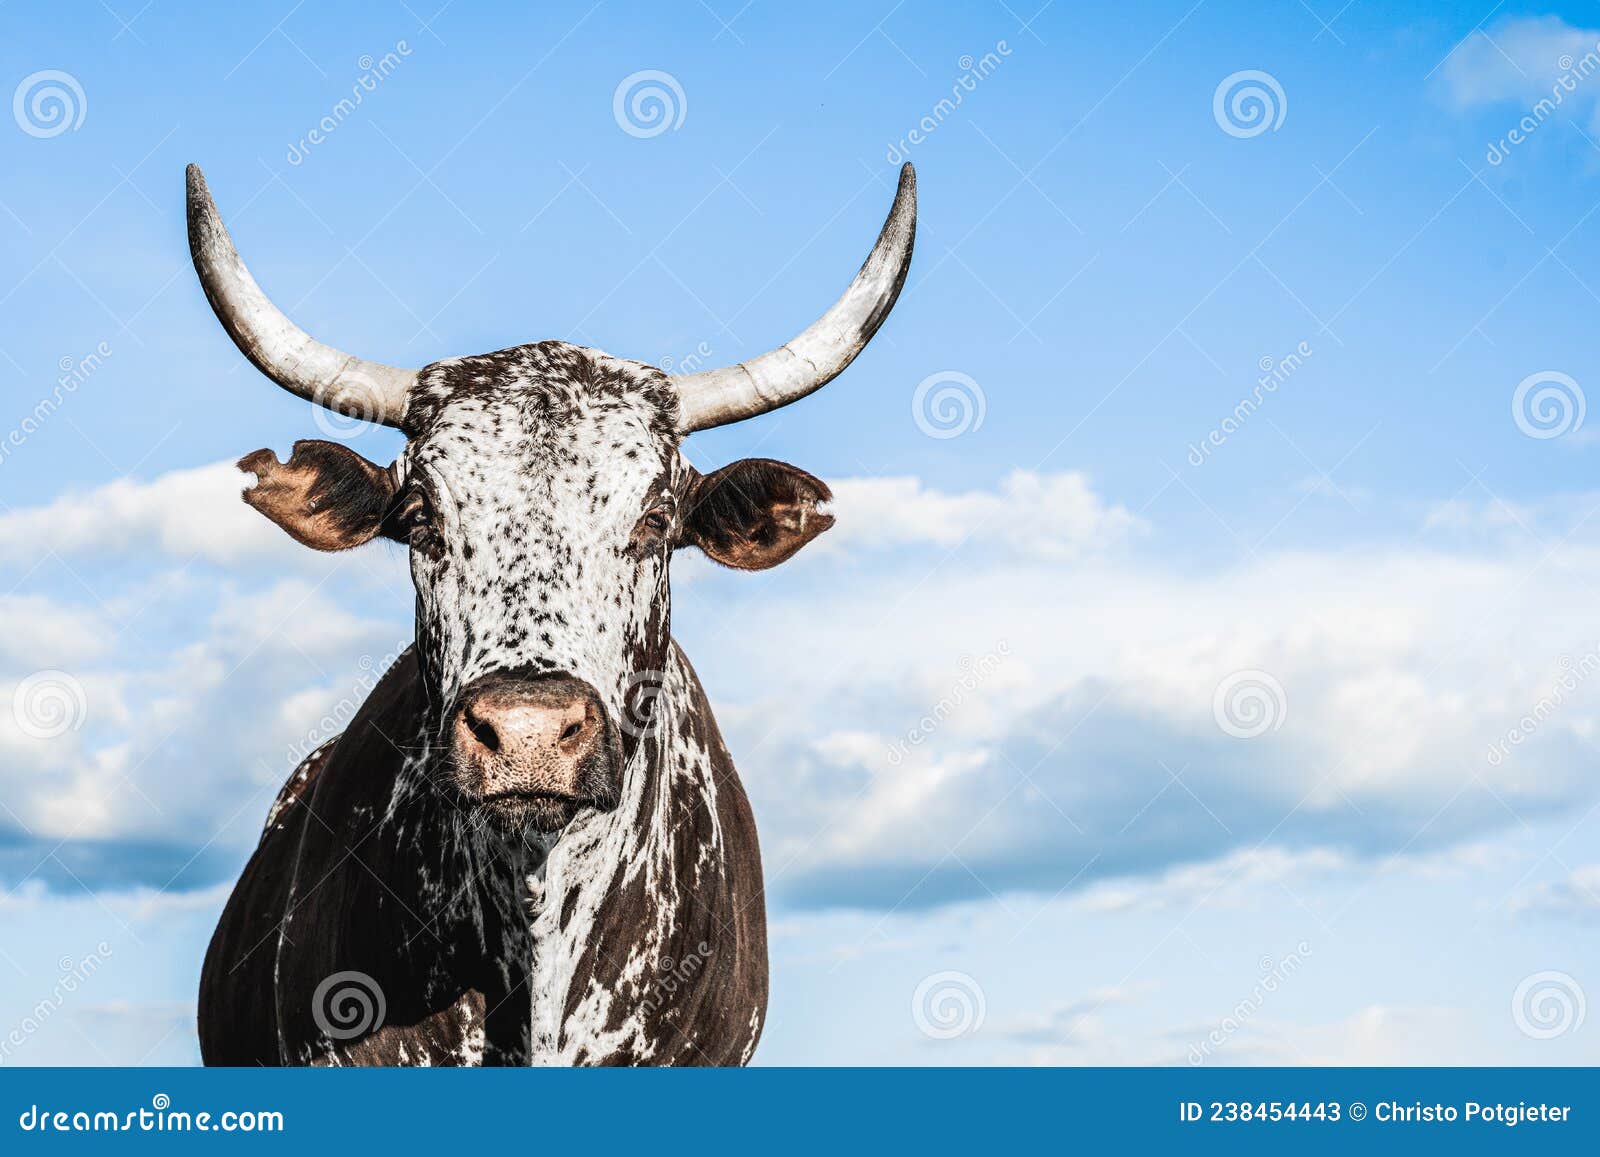 endangered horny spotted cow. nguni cattle ranch farming. africa cattle cow.